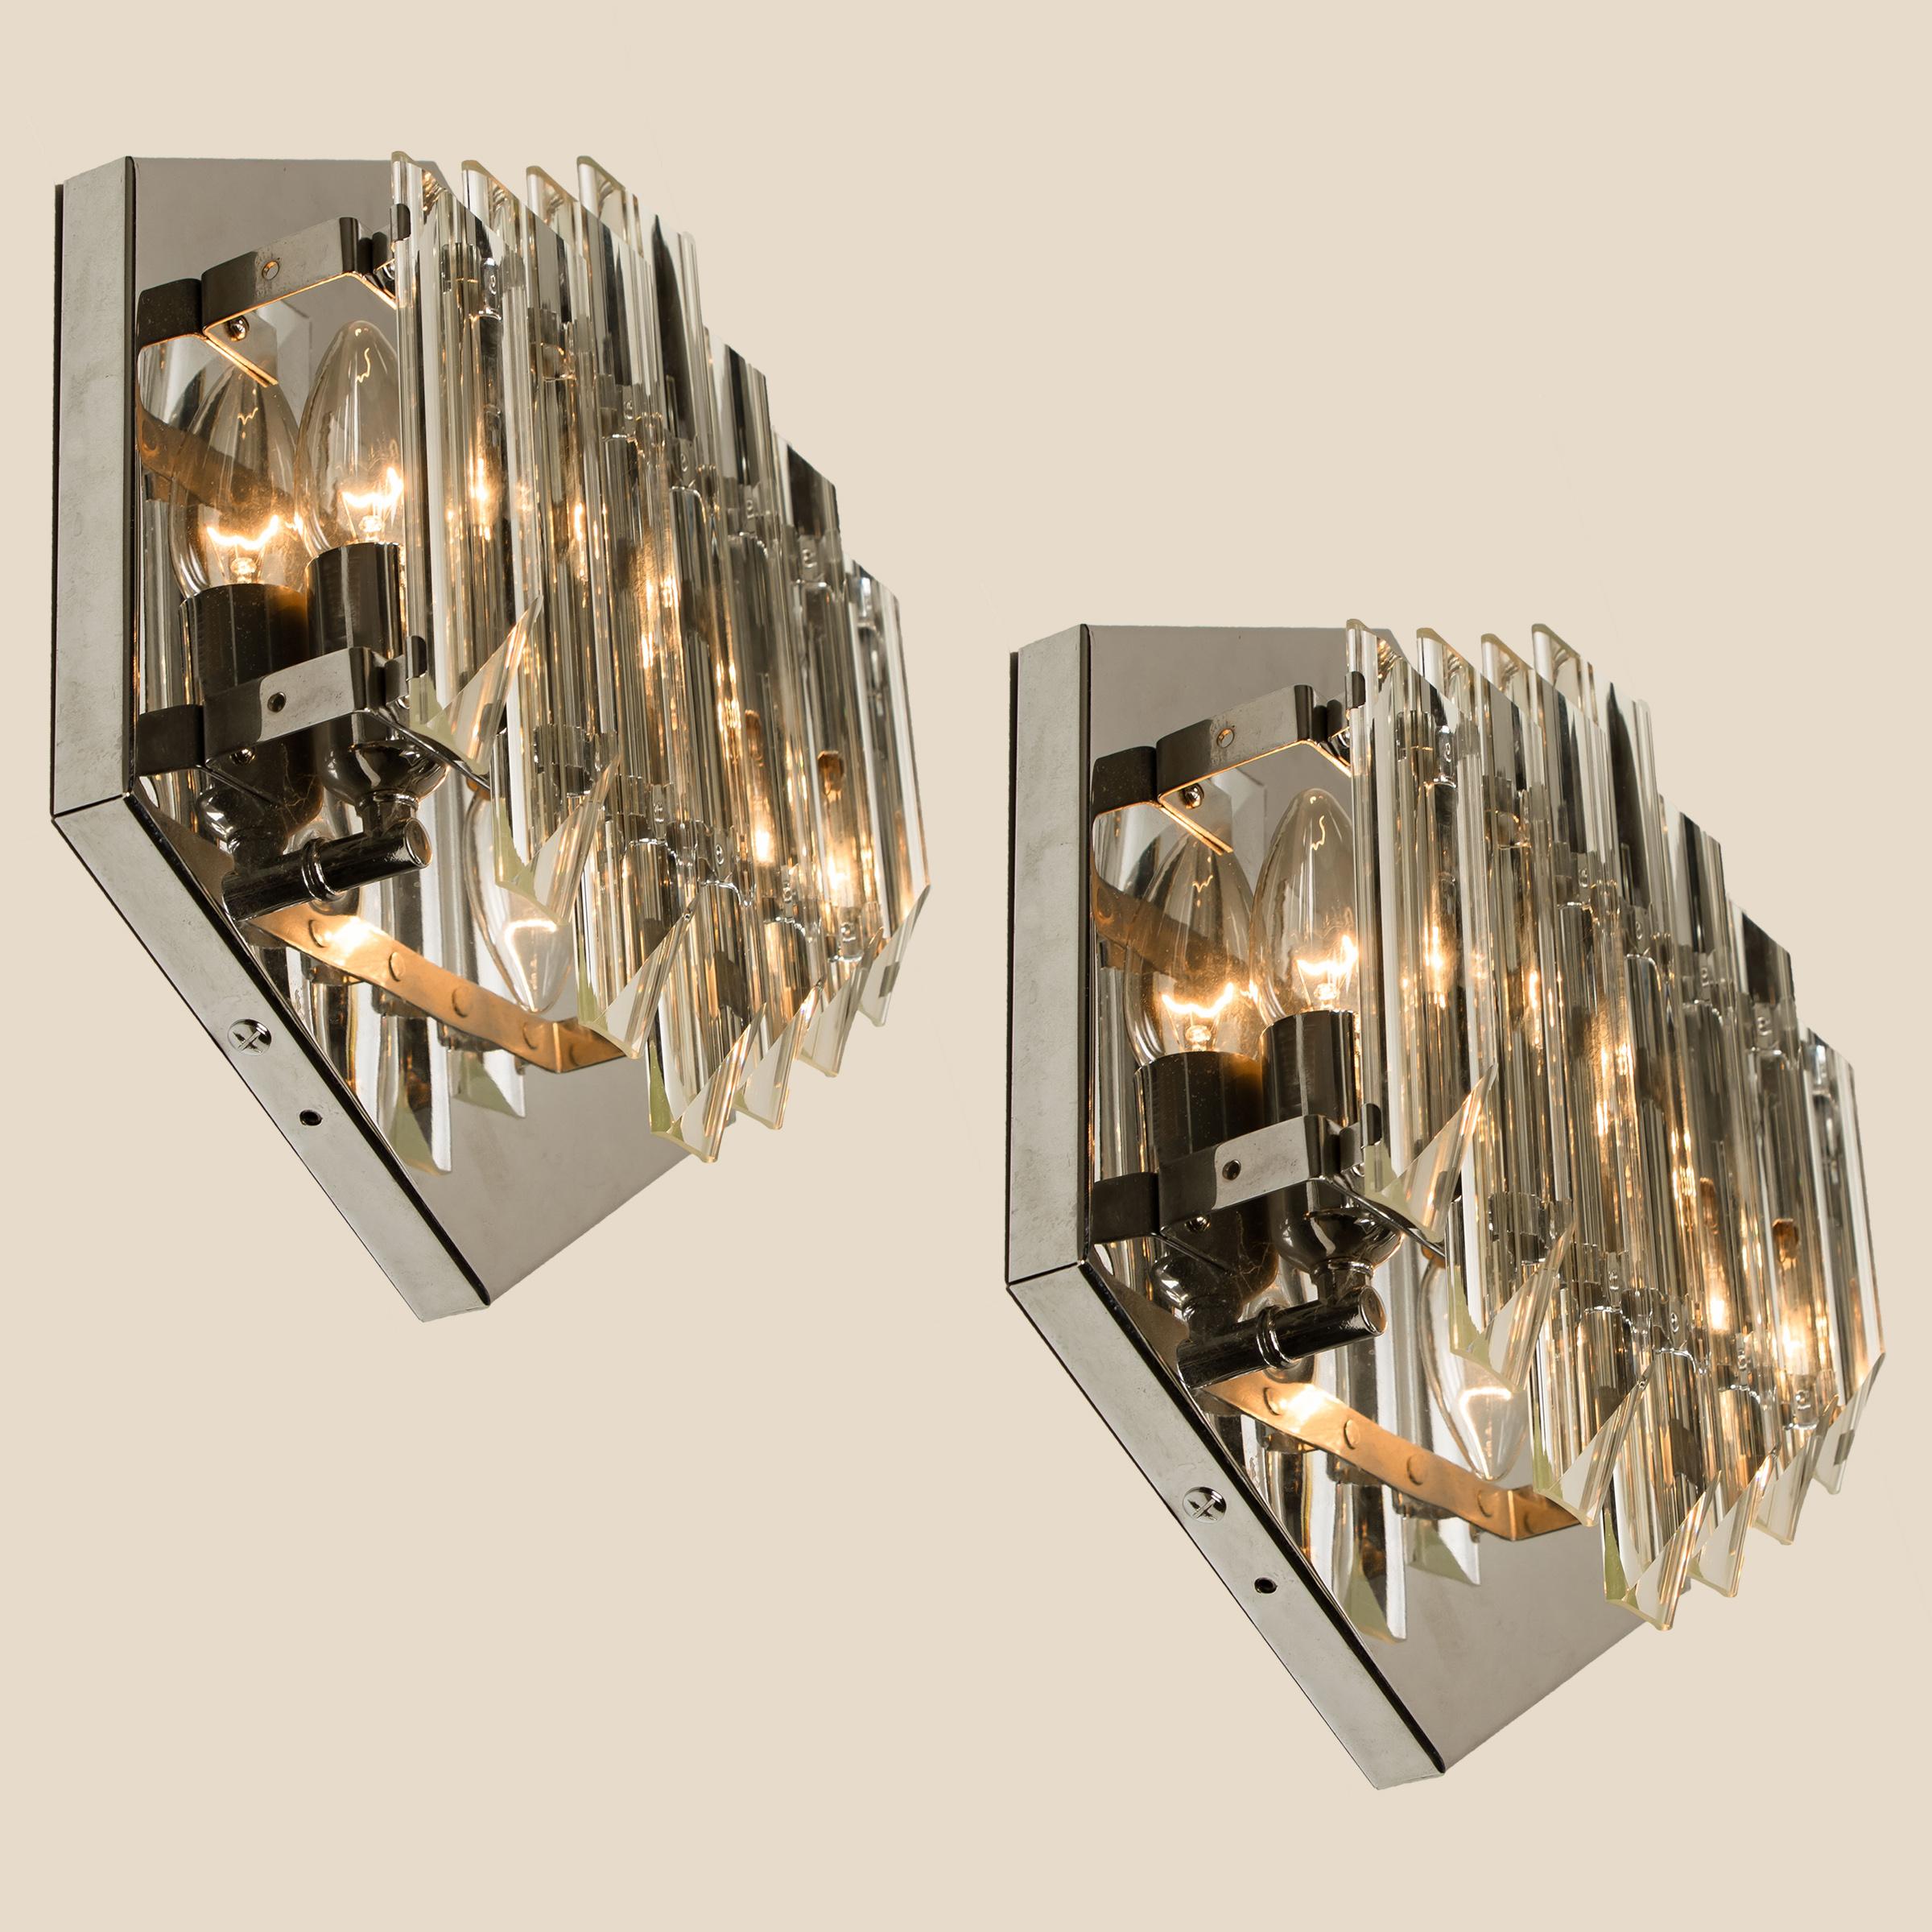 Pair of Large Venini Style Glass Sconces with Triedi Crystals, 1969 In Good Condition For Sale In Rijssen, NL